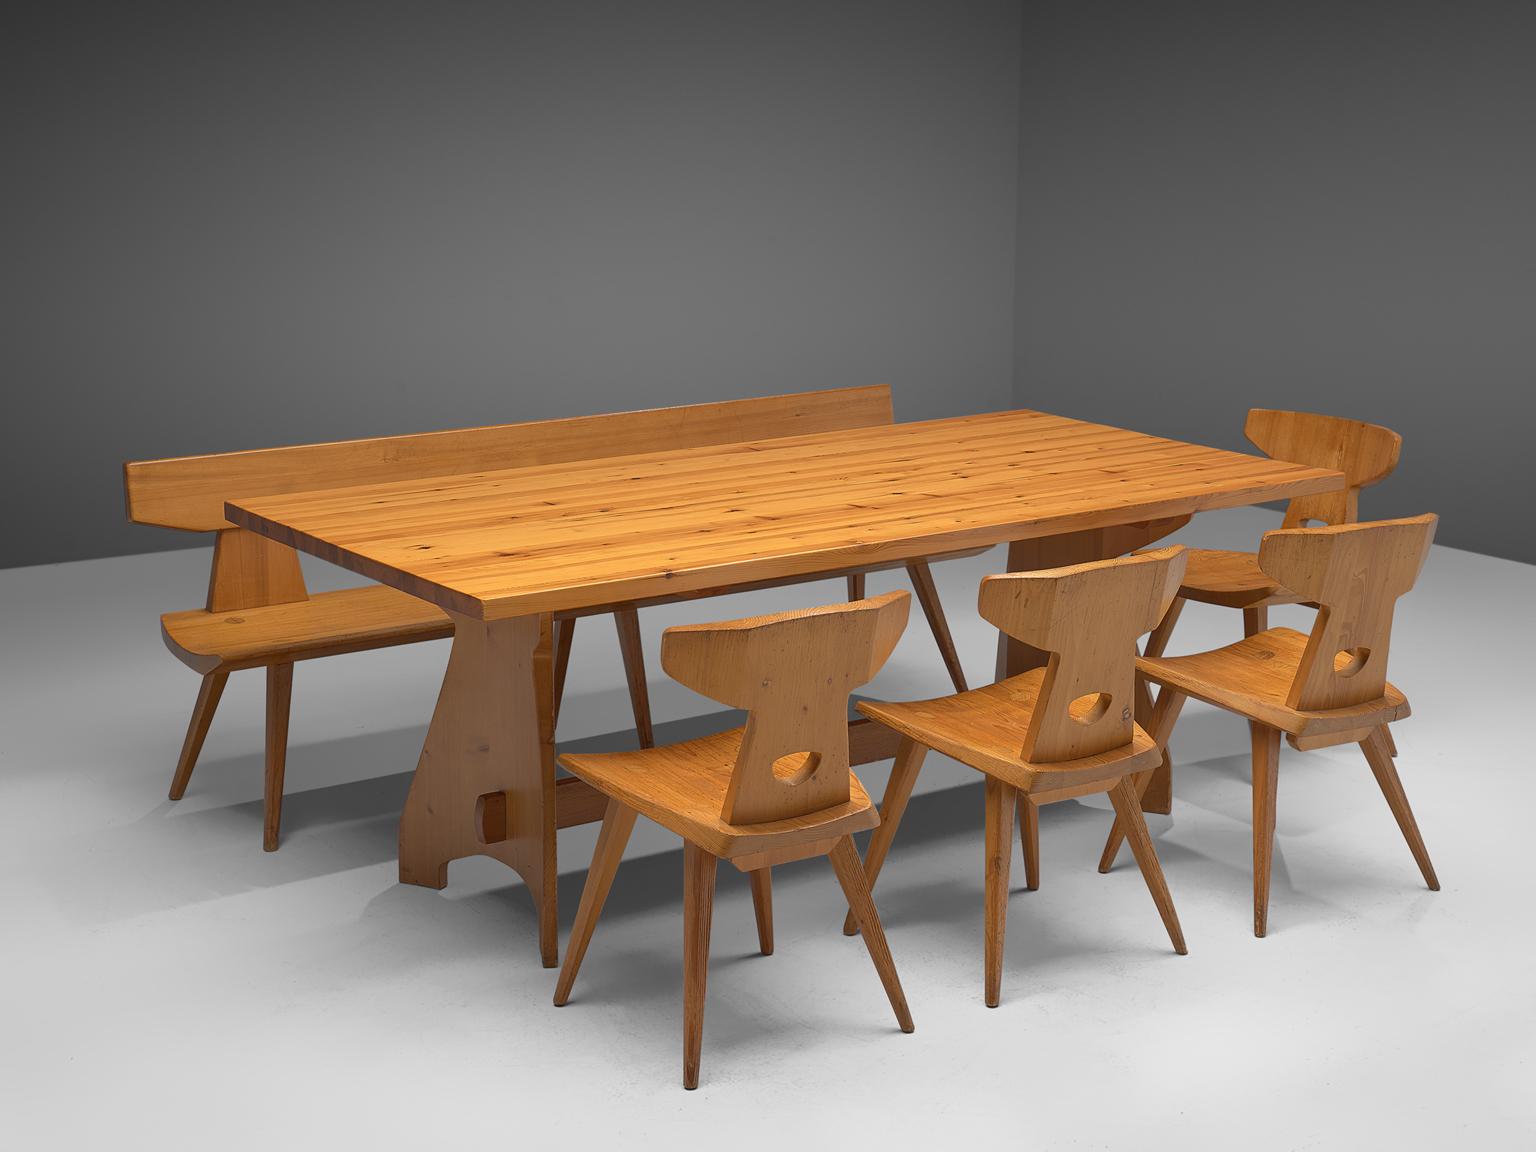 Jacob Kielland-Brandt, dining set, solid pine, Denmark, 1960s.

Wonderful Scandinavian Modern dining room set in solid pine by Jacob Kielland-Brandt. This remarkable set holds a strong expression and this organic shaped design is in well contrast